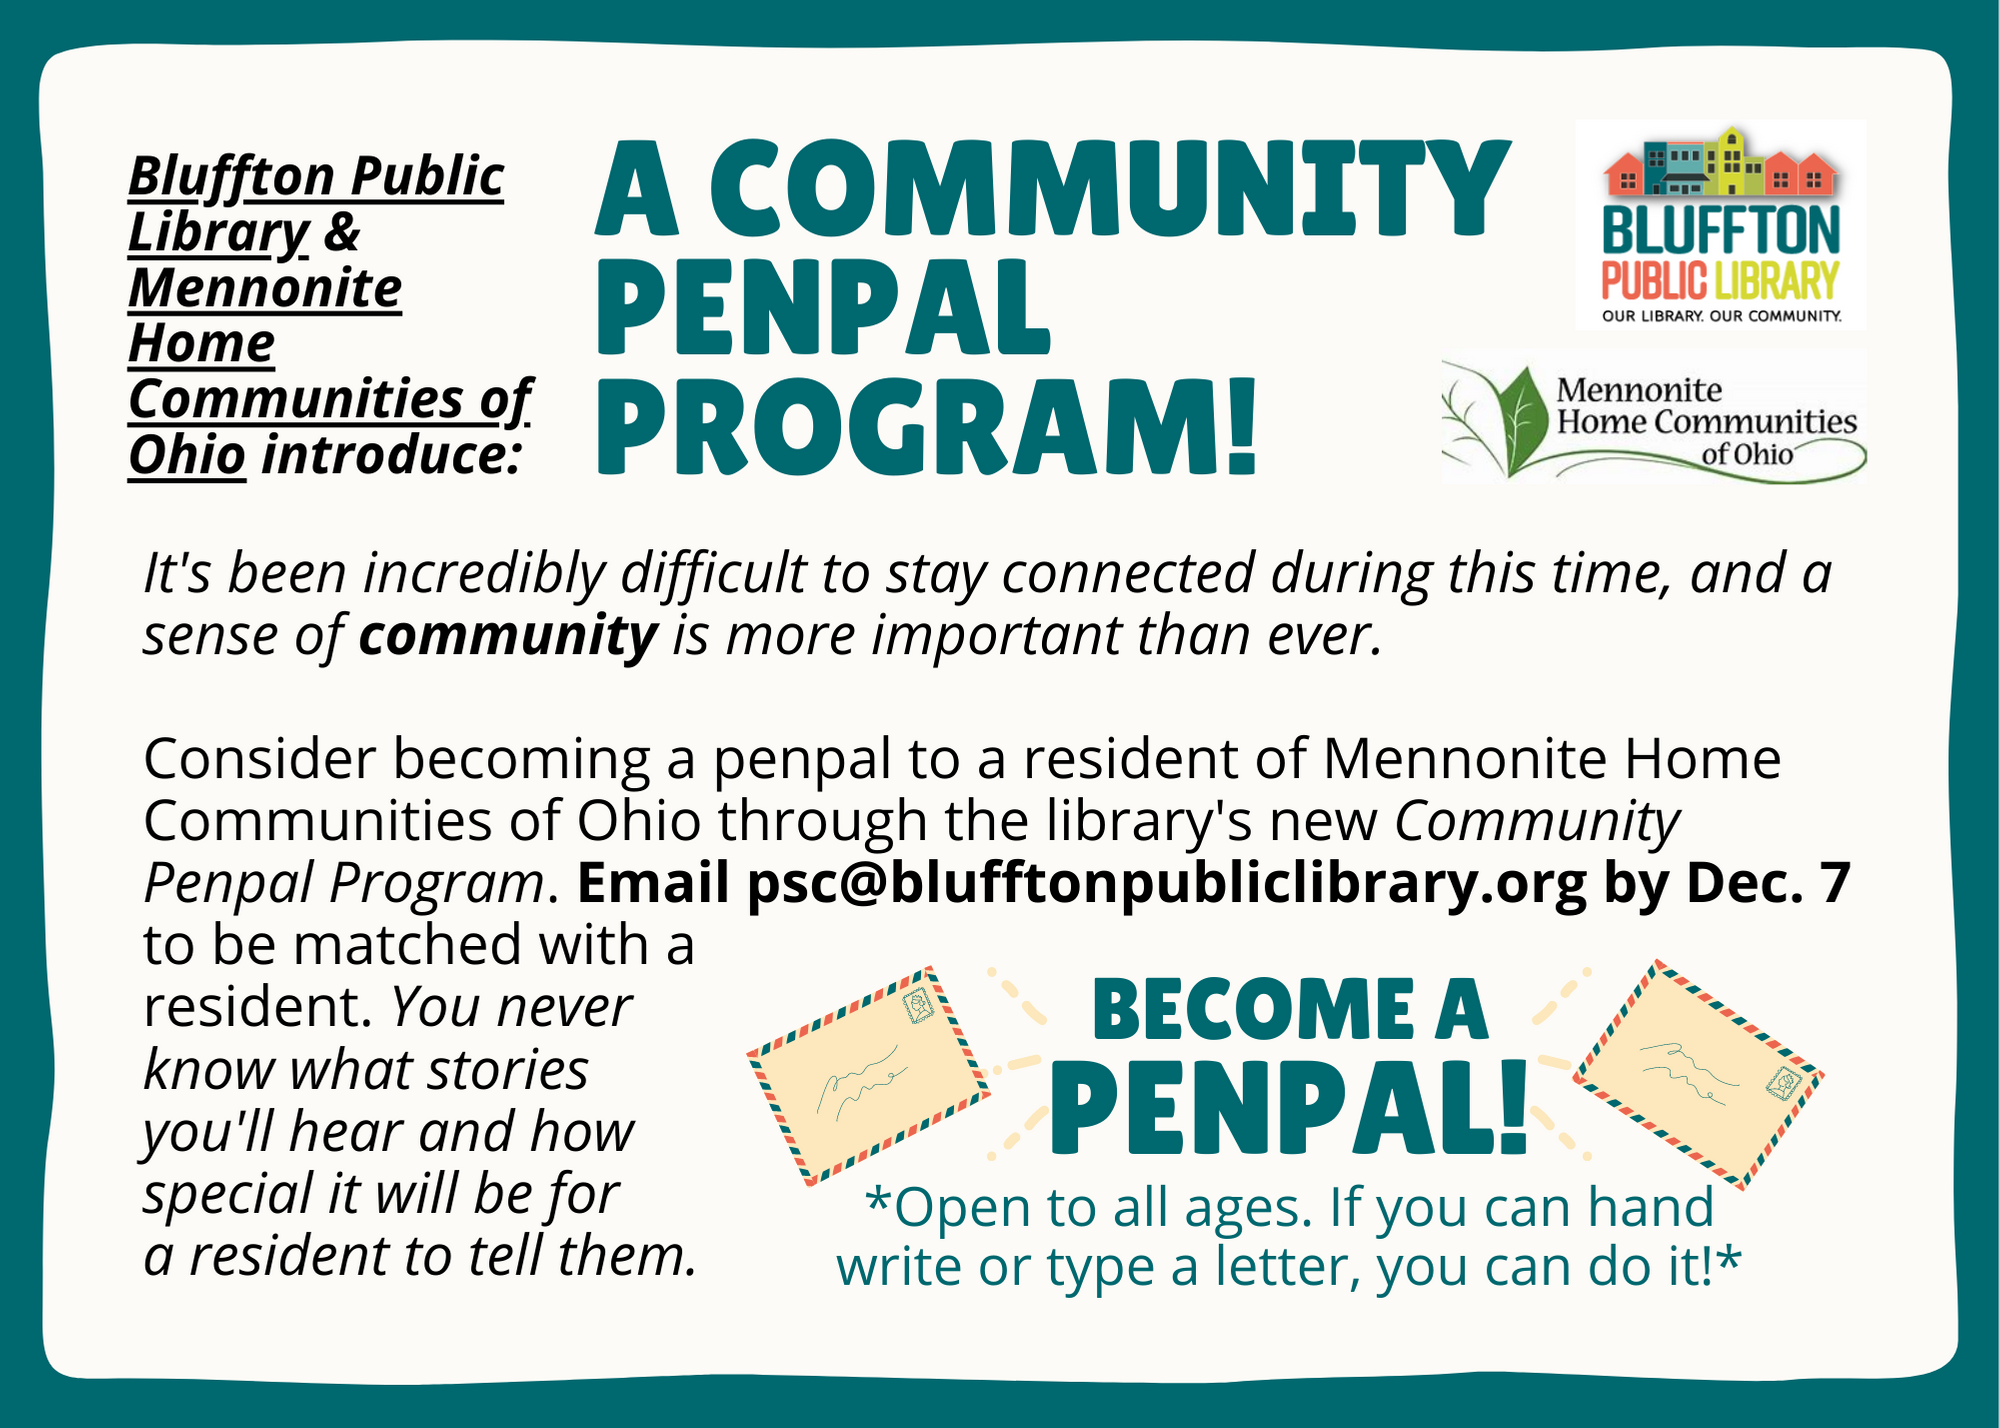 Bluffton Public Library & Mennonite Home Communities of Ohio introduce: A Community Penpal Program! Become a Penpal! Open to all ages. If you can hand write or type a letter, you can do it!